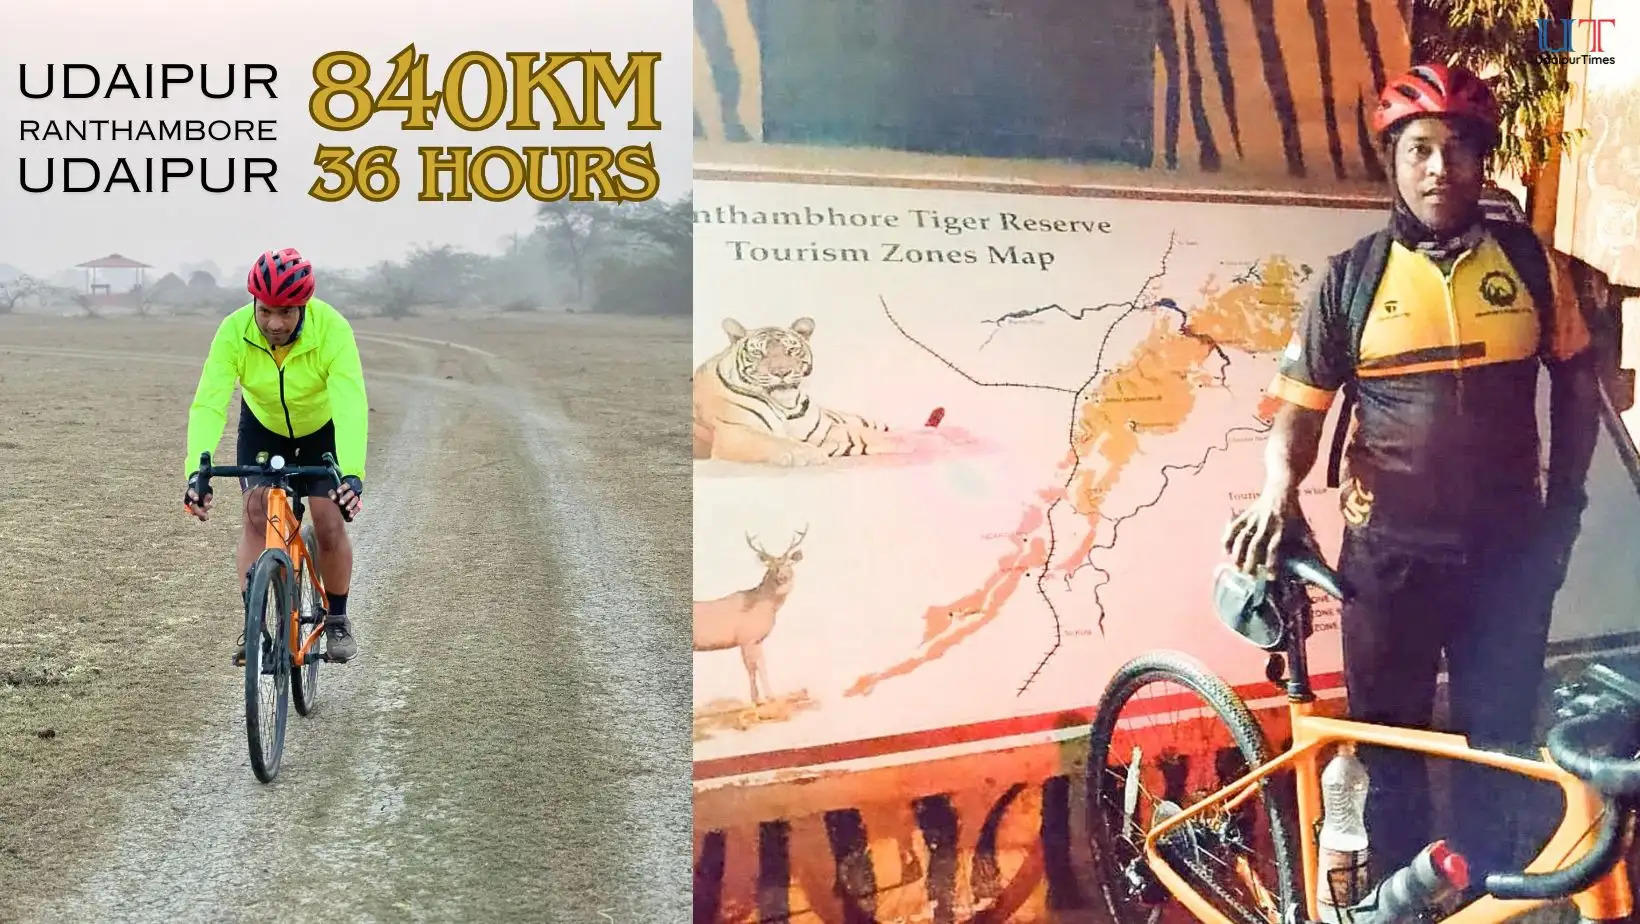 Ranthambor Tiger Reserve Udaipur Cycling Club member Chhagan Mali completes 840km to and fro between Udaipur and Ranthambore in a record 36 hours